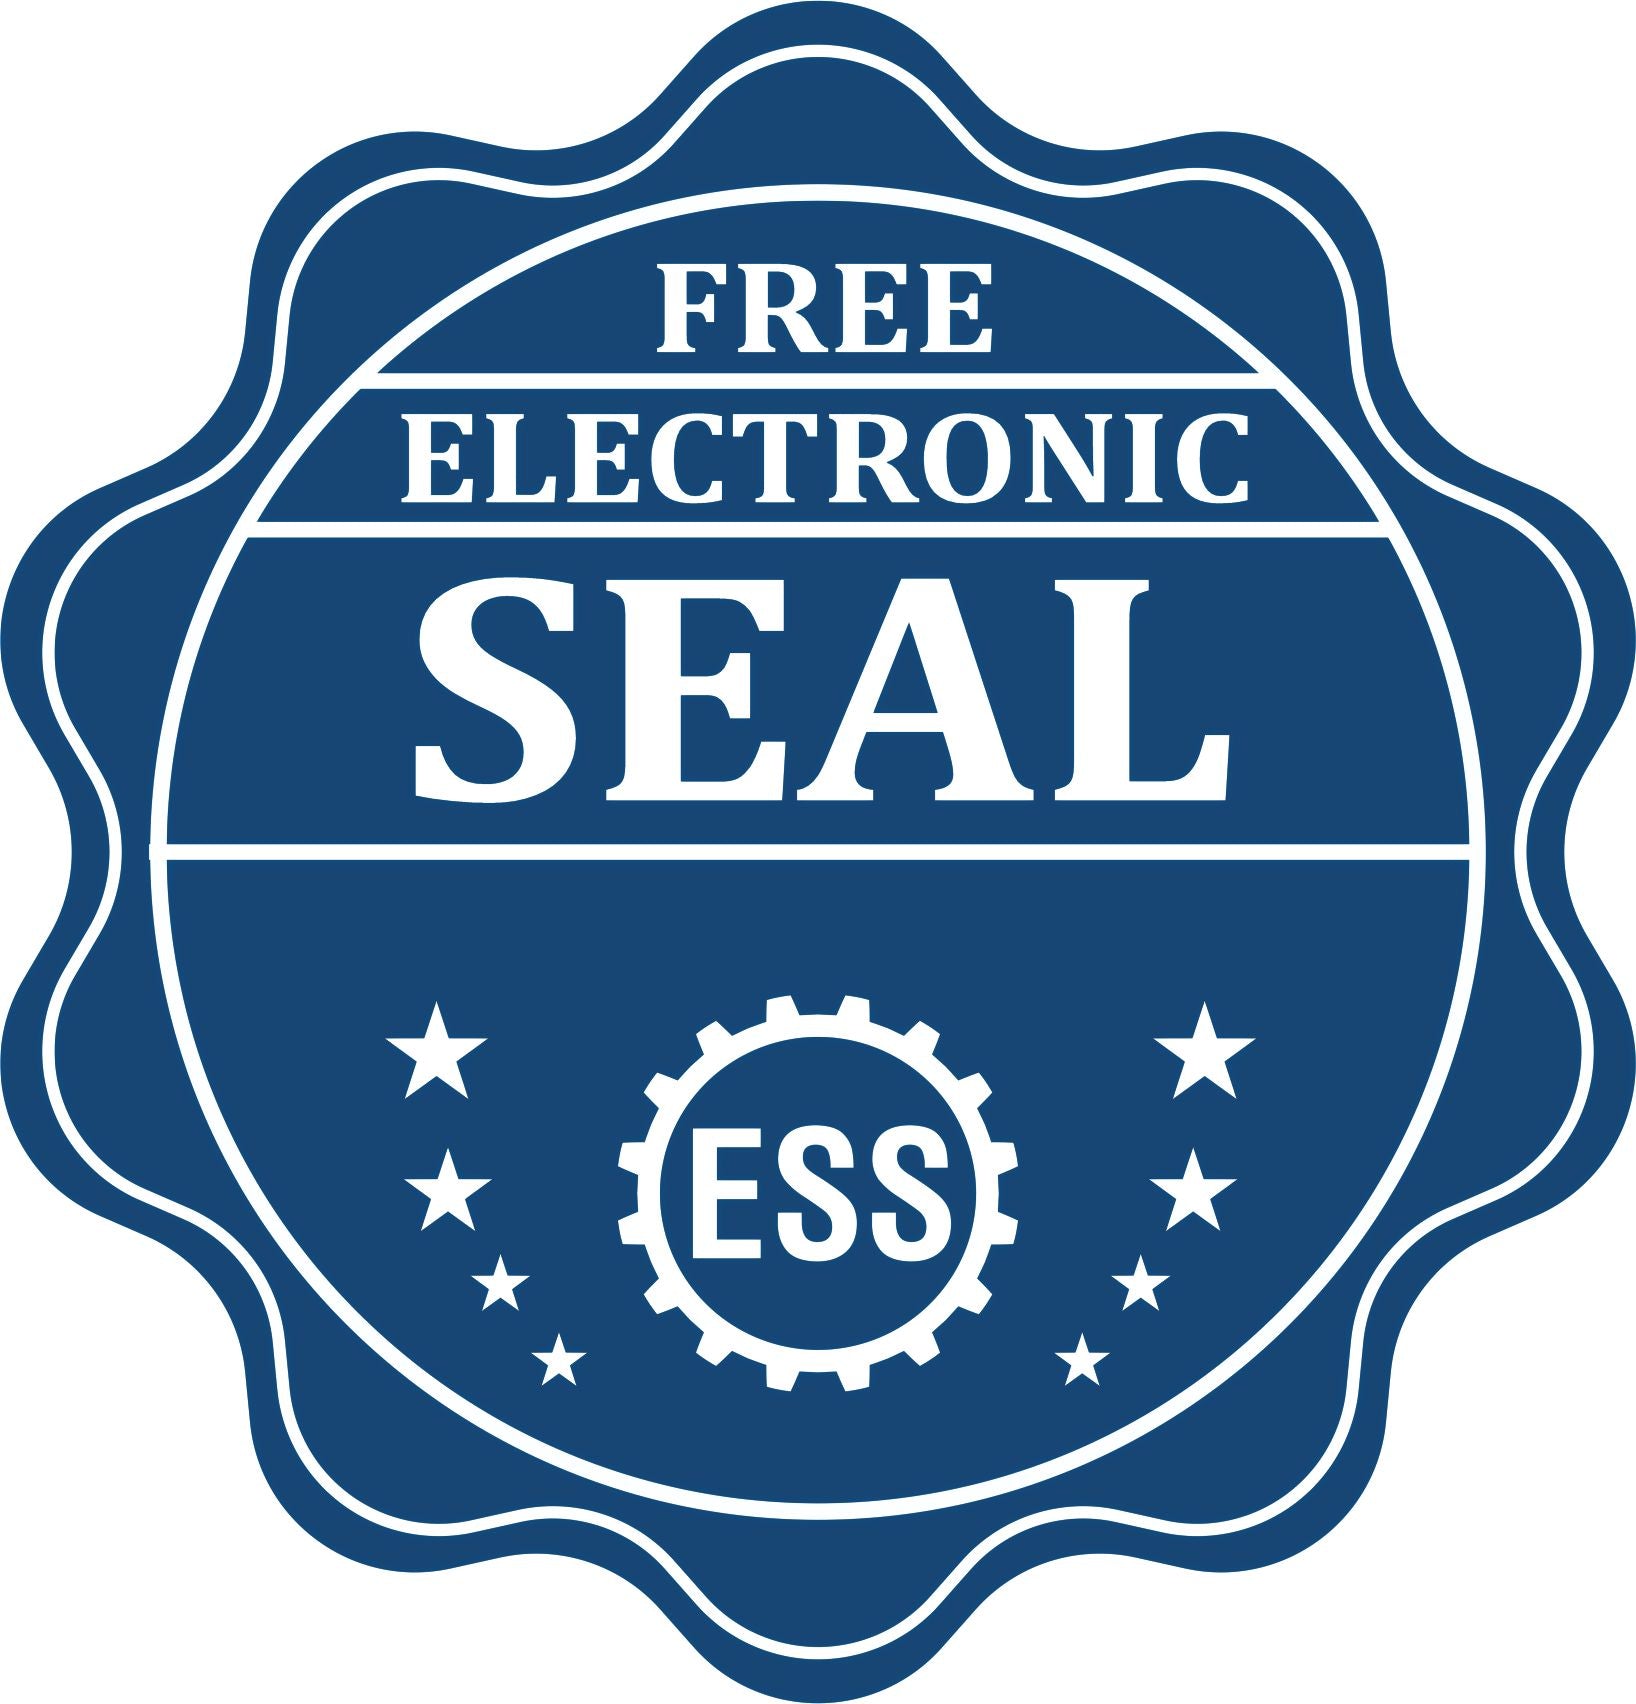 A badge showing a free electronic seal for the Heavy Duty Cast Iron Idaho Geologist Seal Embosser with stars and the ESS gear on the emblem.